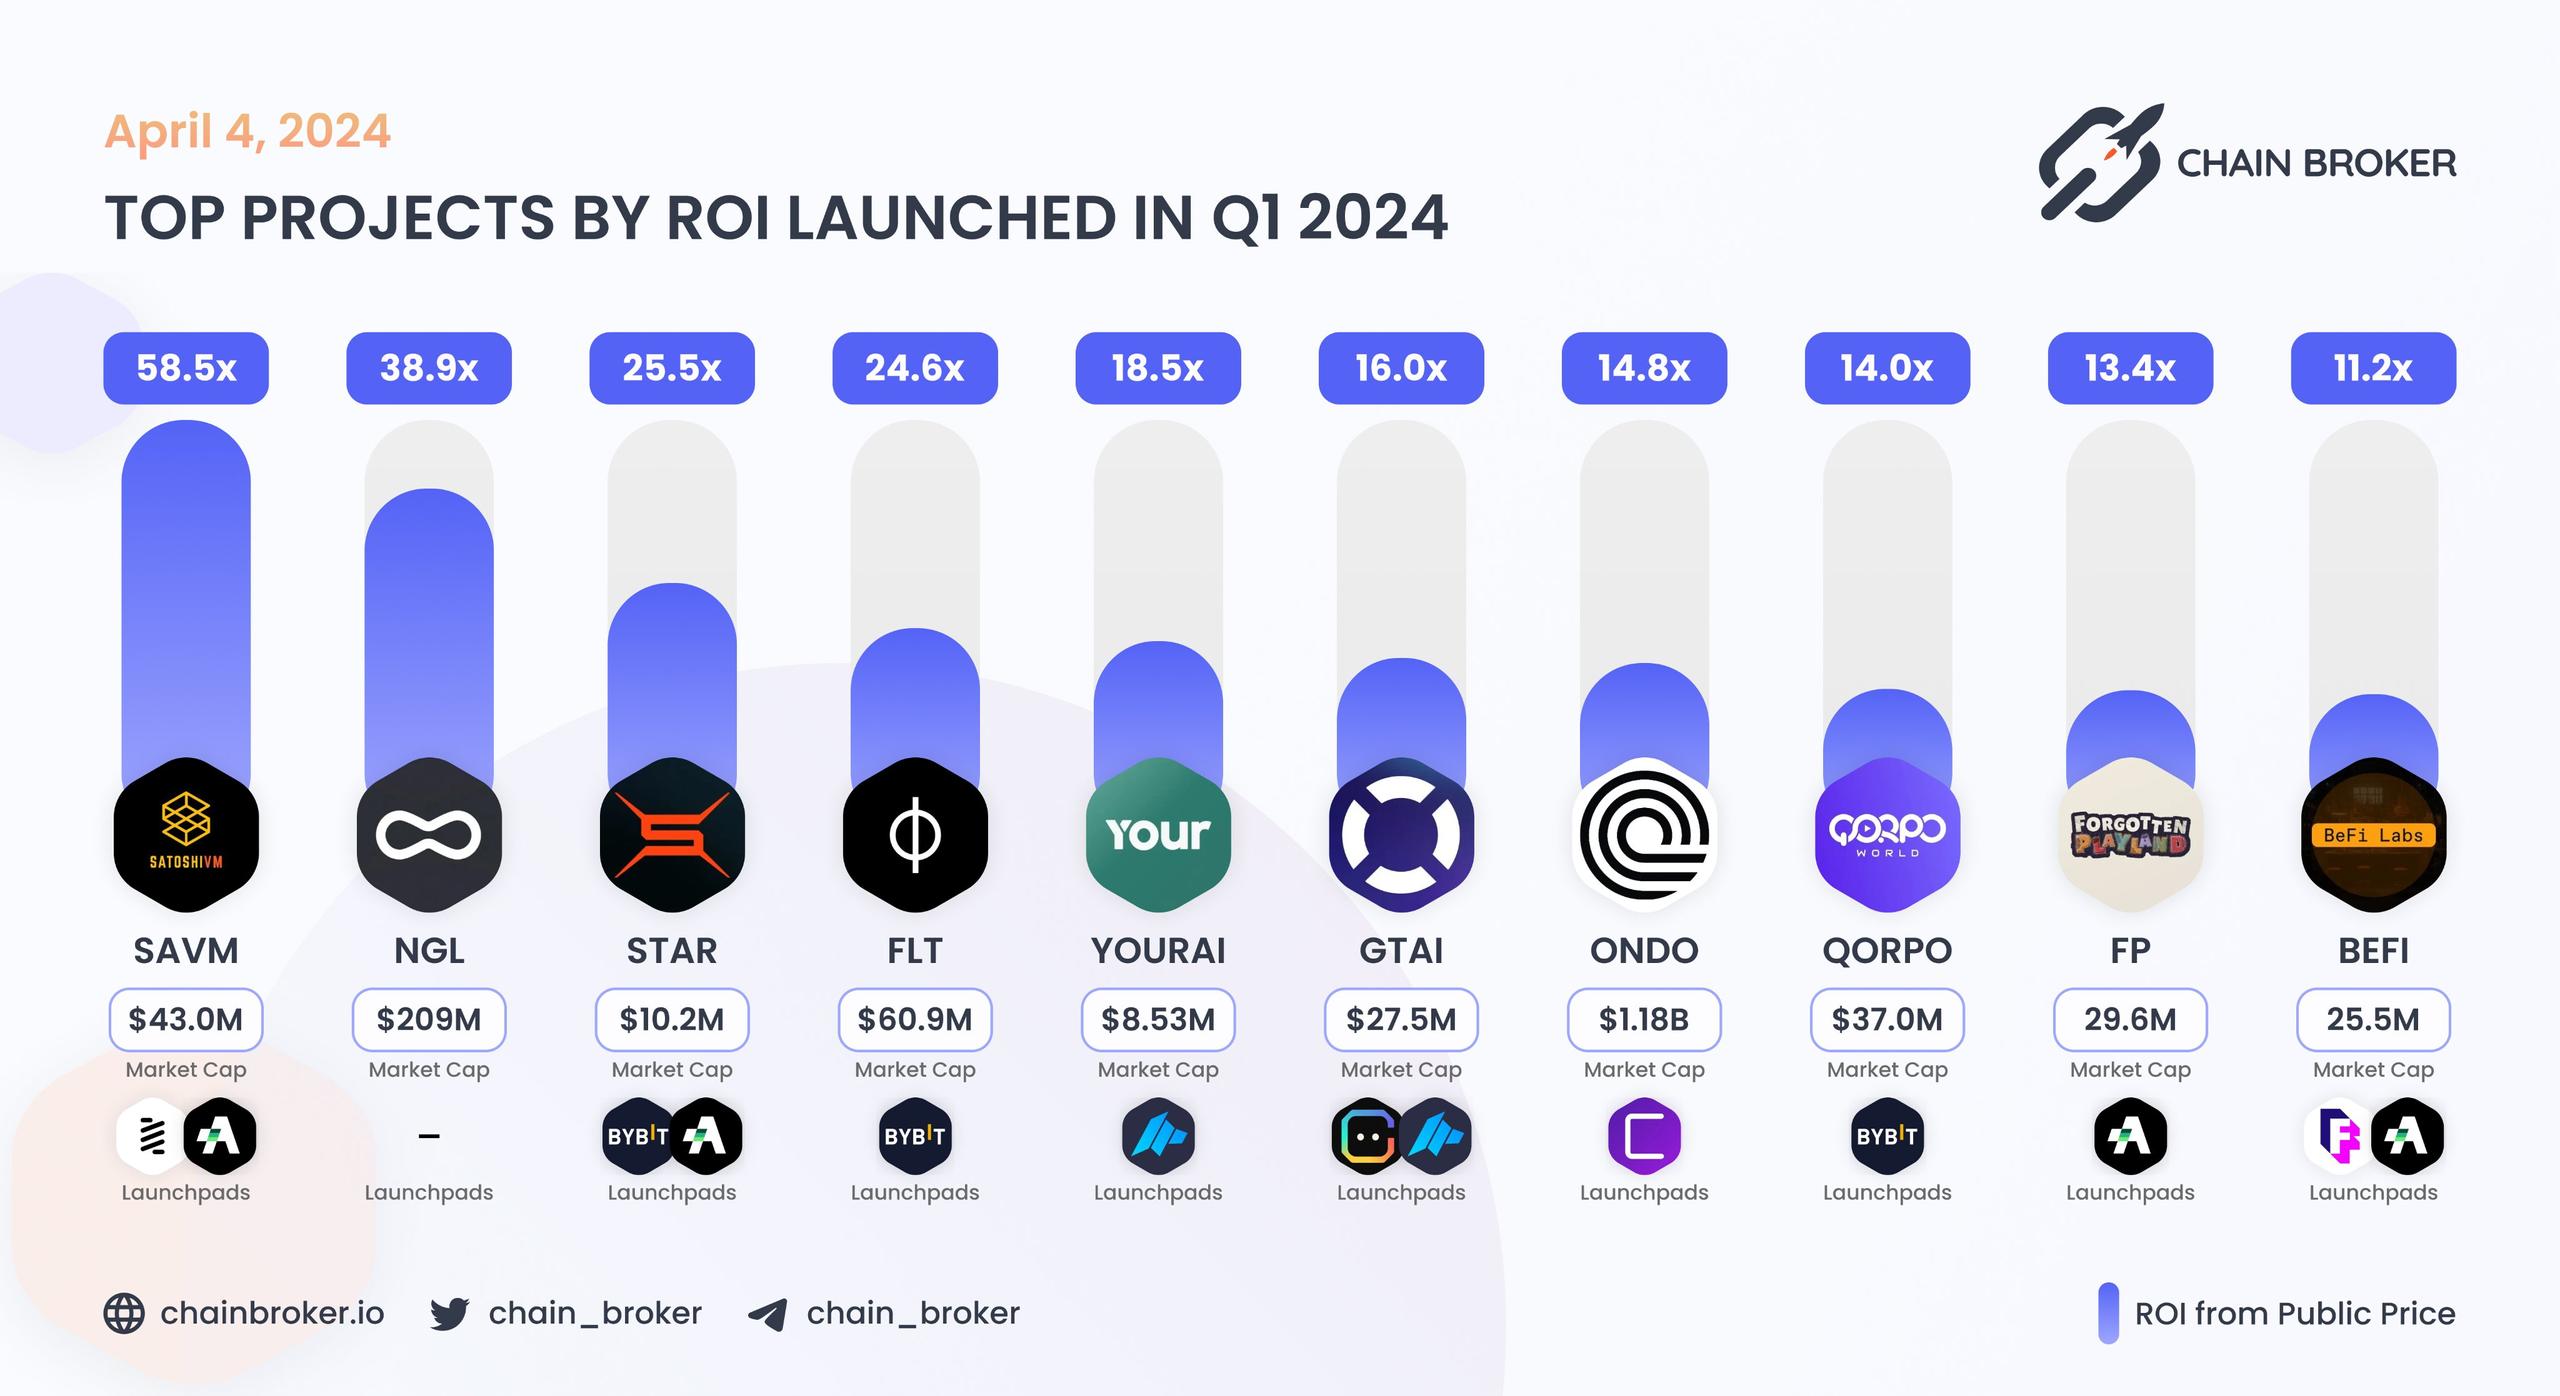 Top projects by ROI launched in Q1 2024